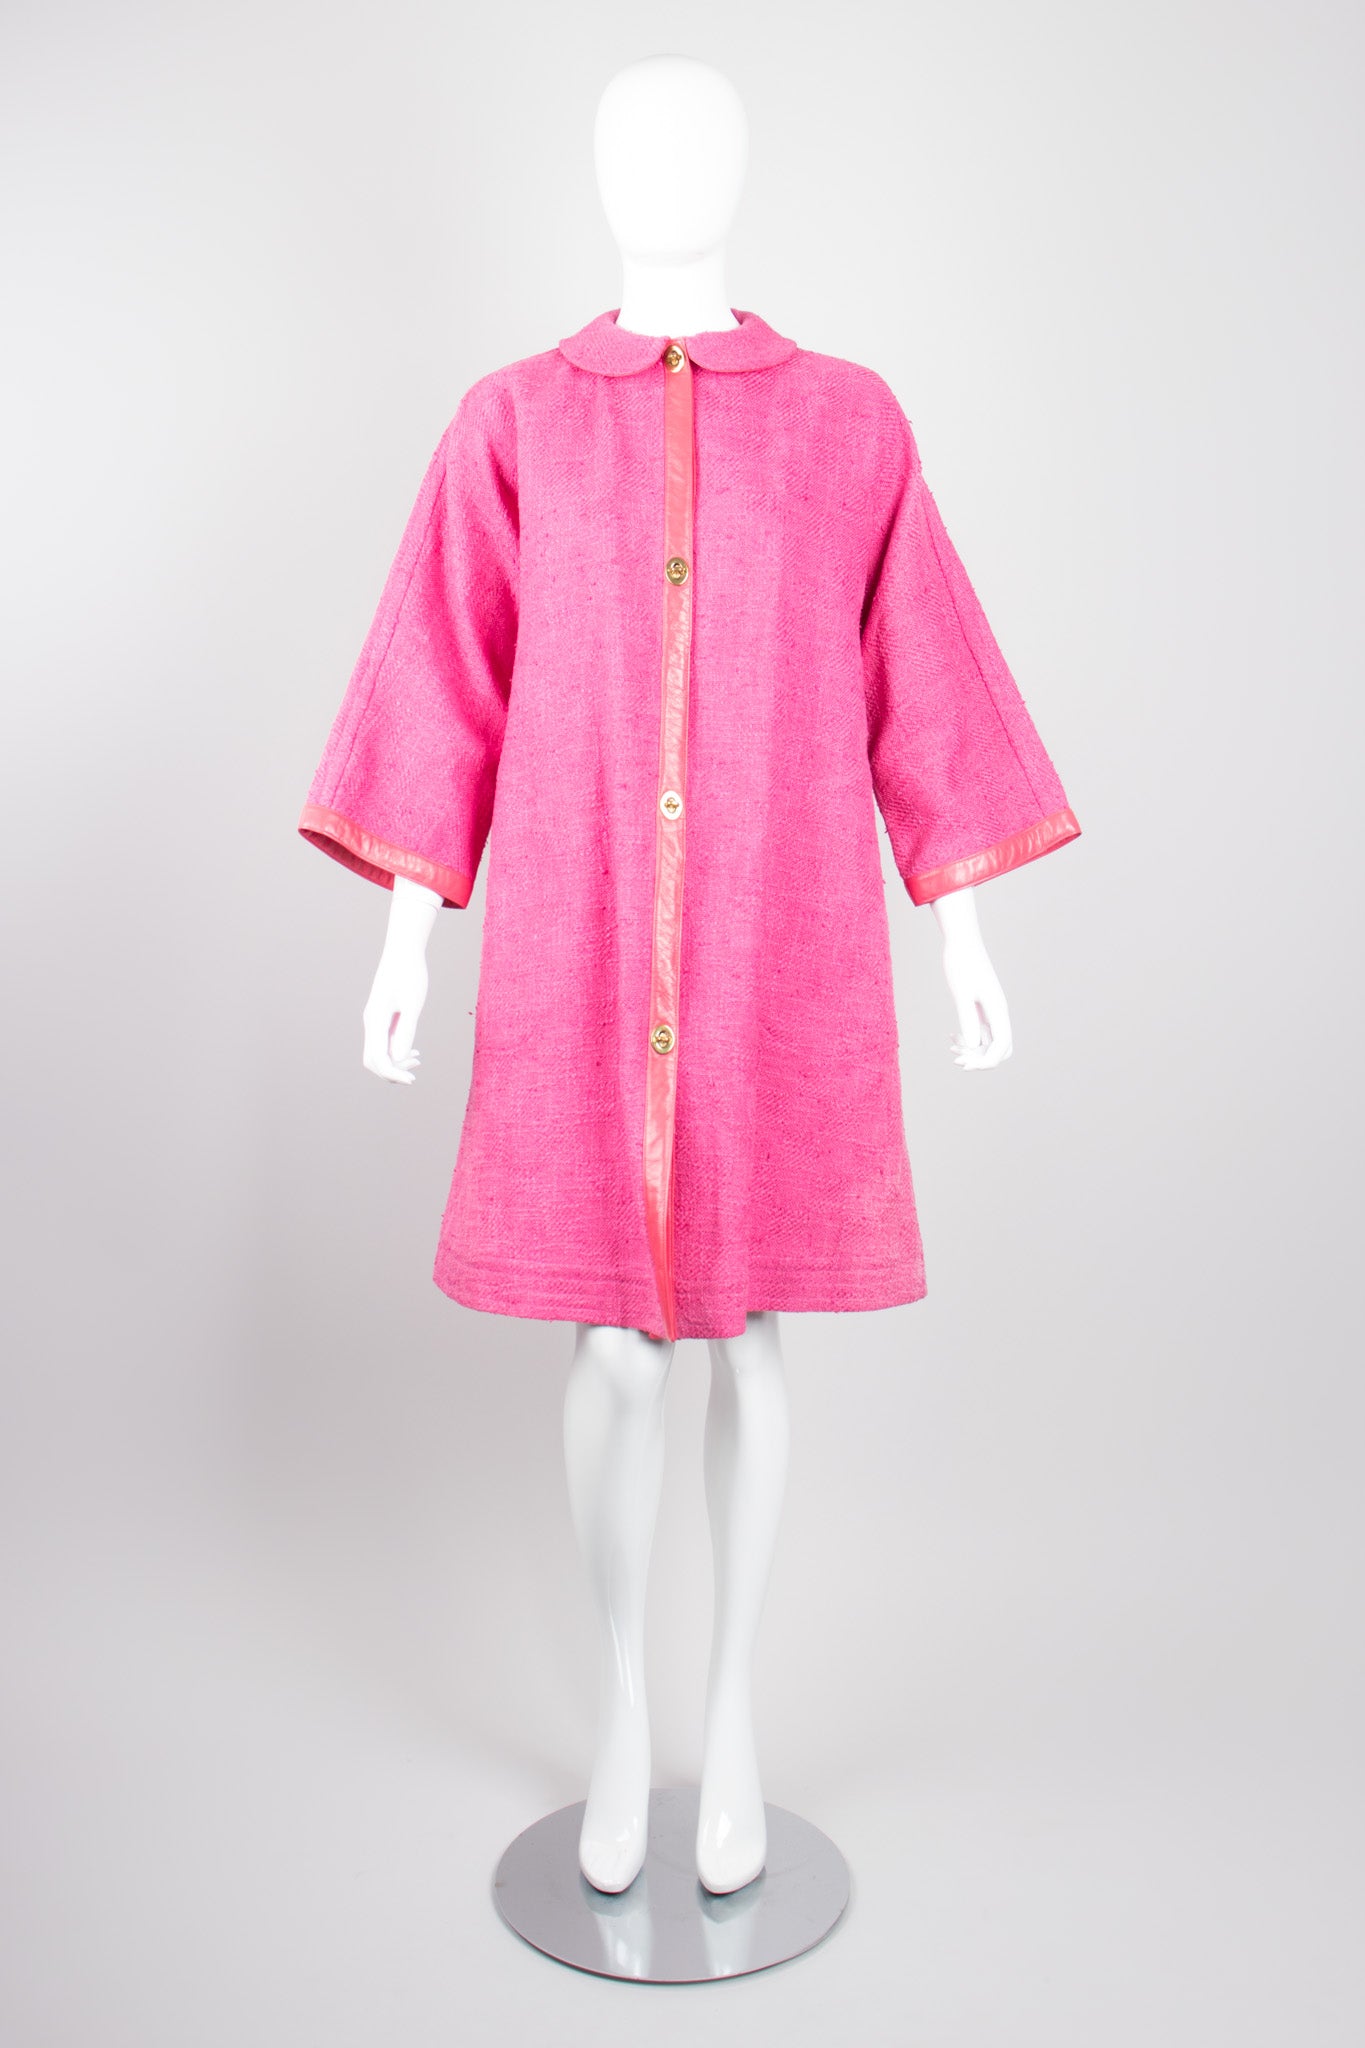 Bonnie Cashin for Sills Pink Tweed Boucle Turnlock Swing Coat